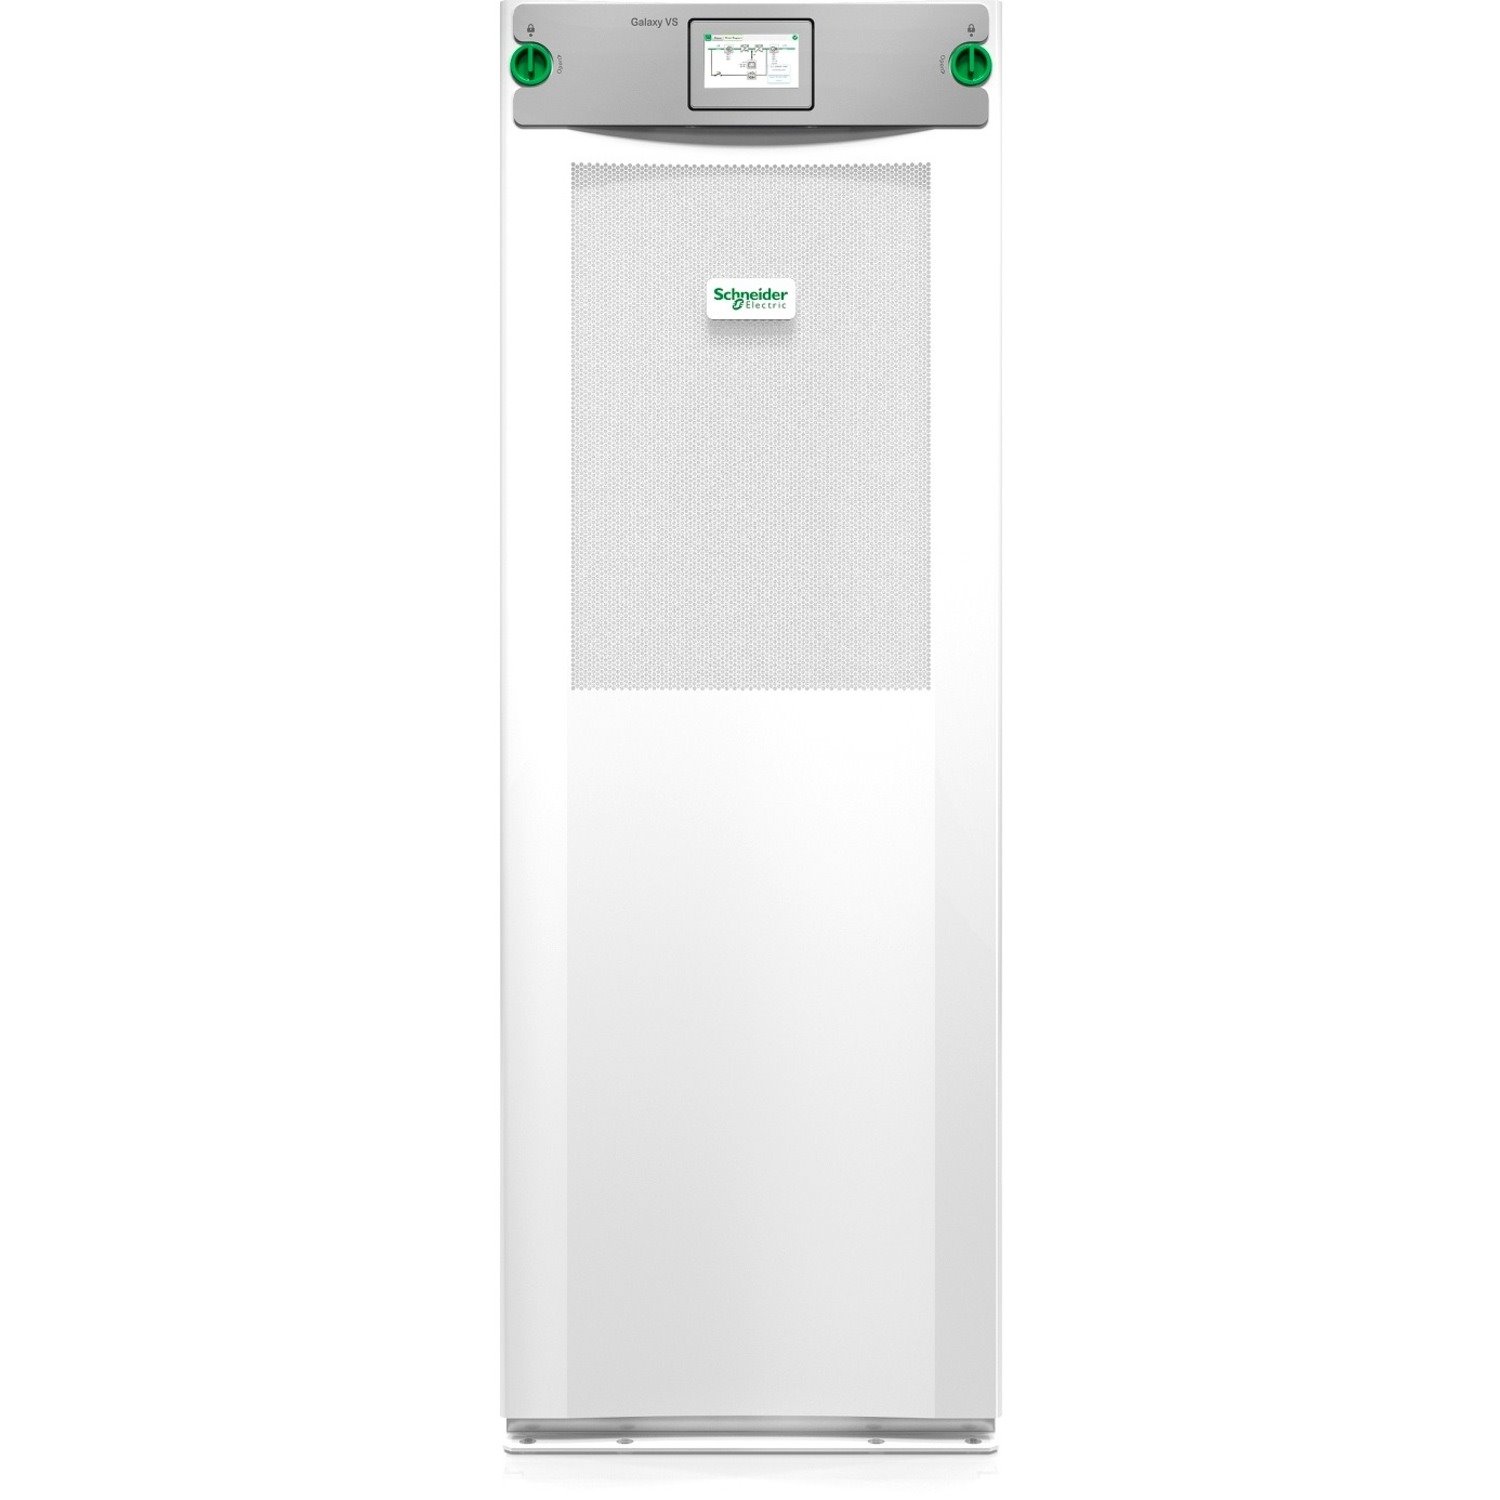 APC by Schneider Electric Galaxy VS UPS 25kW 208V for External Batteries, Start-up 5x8